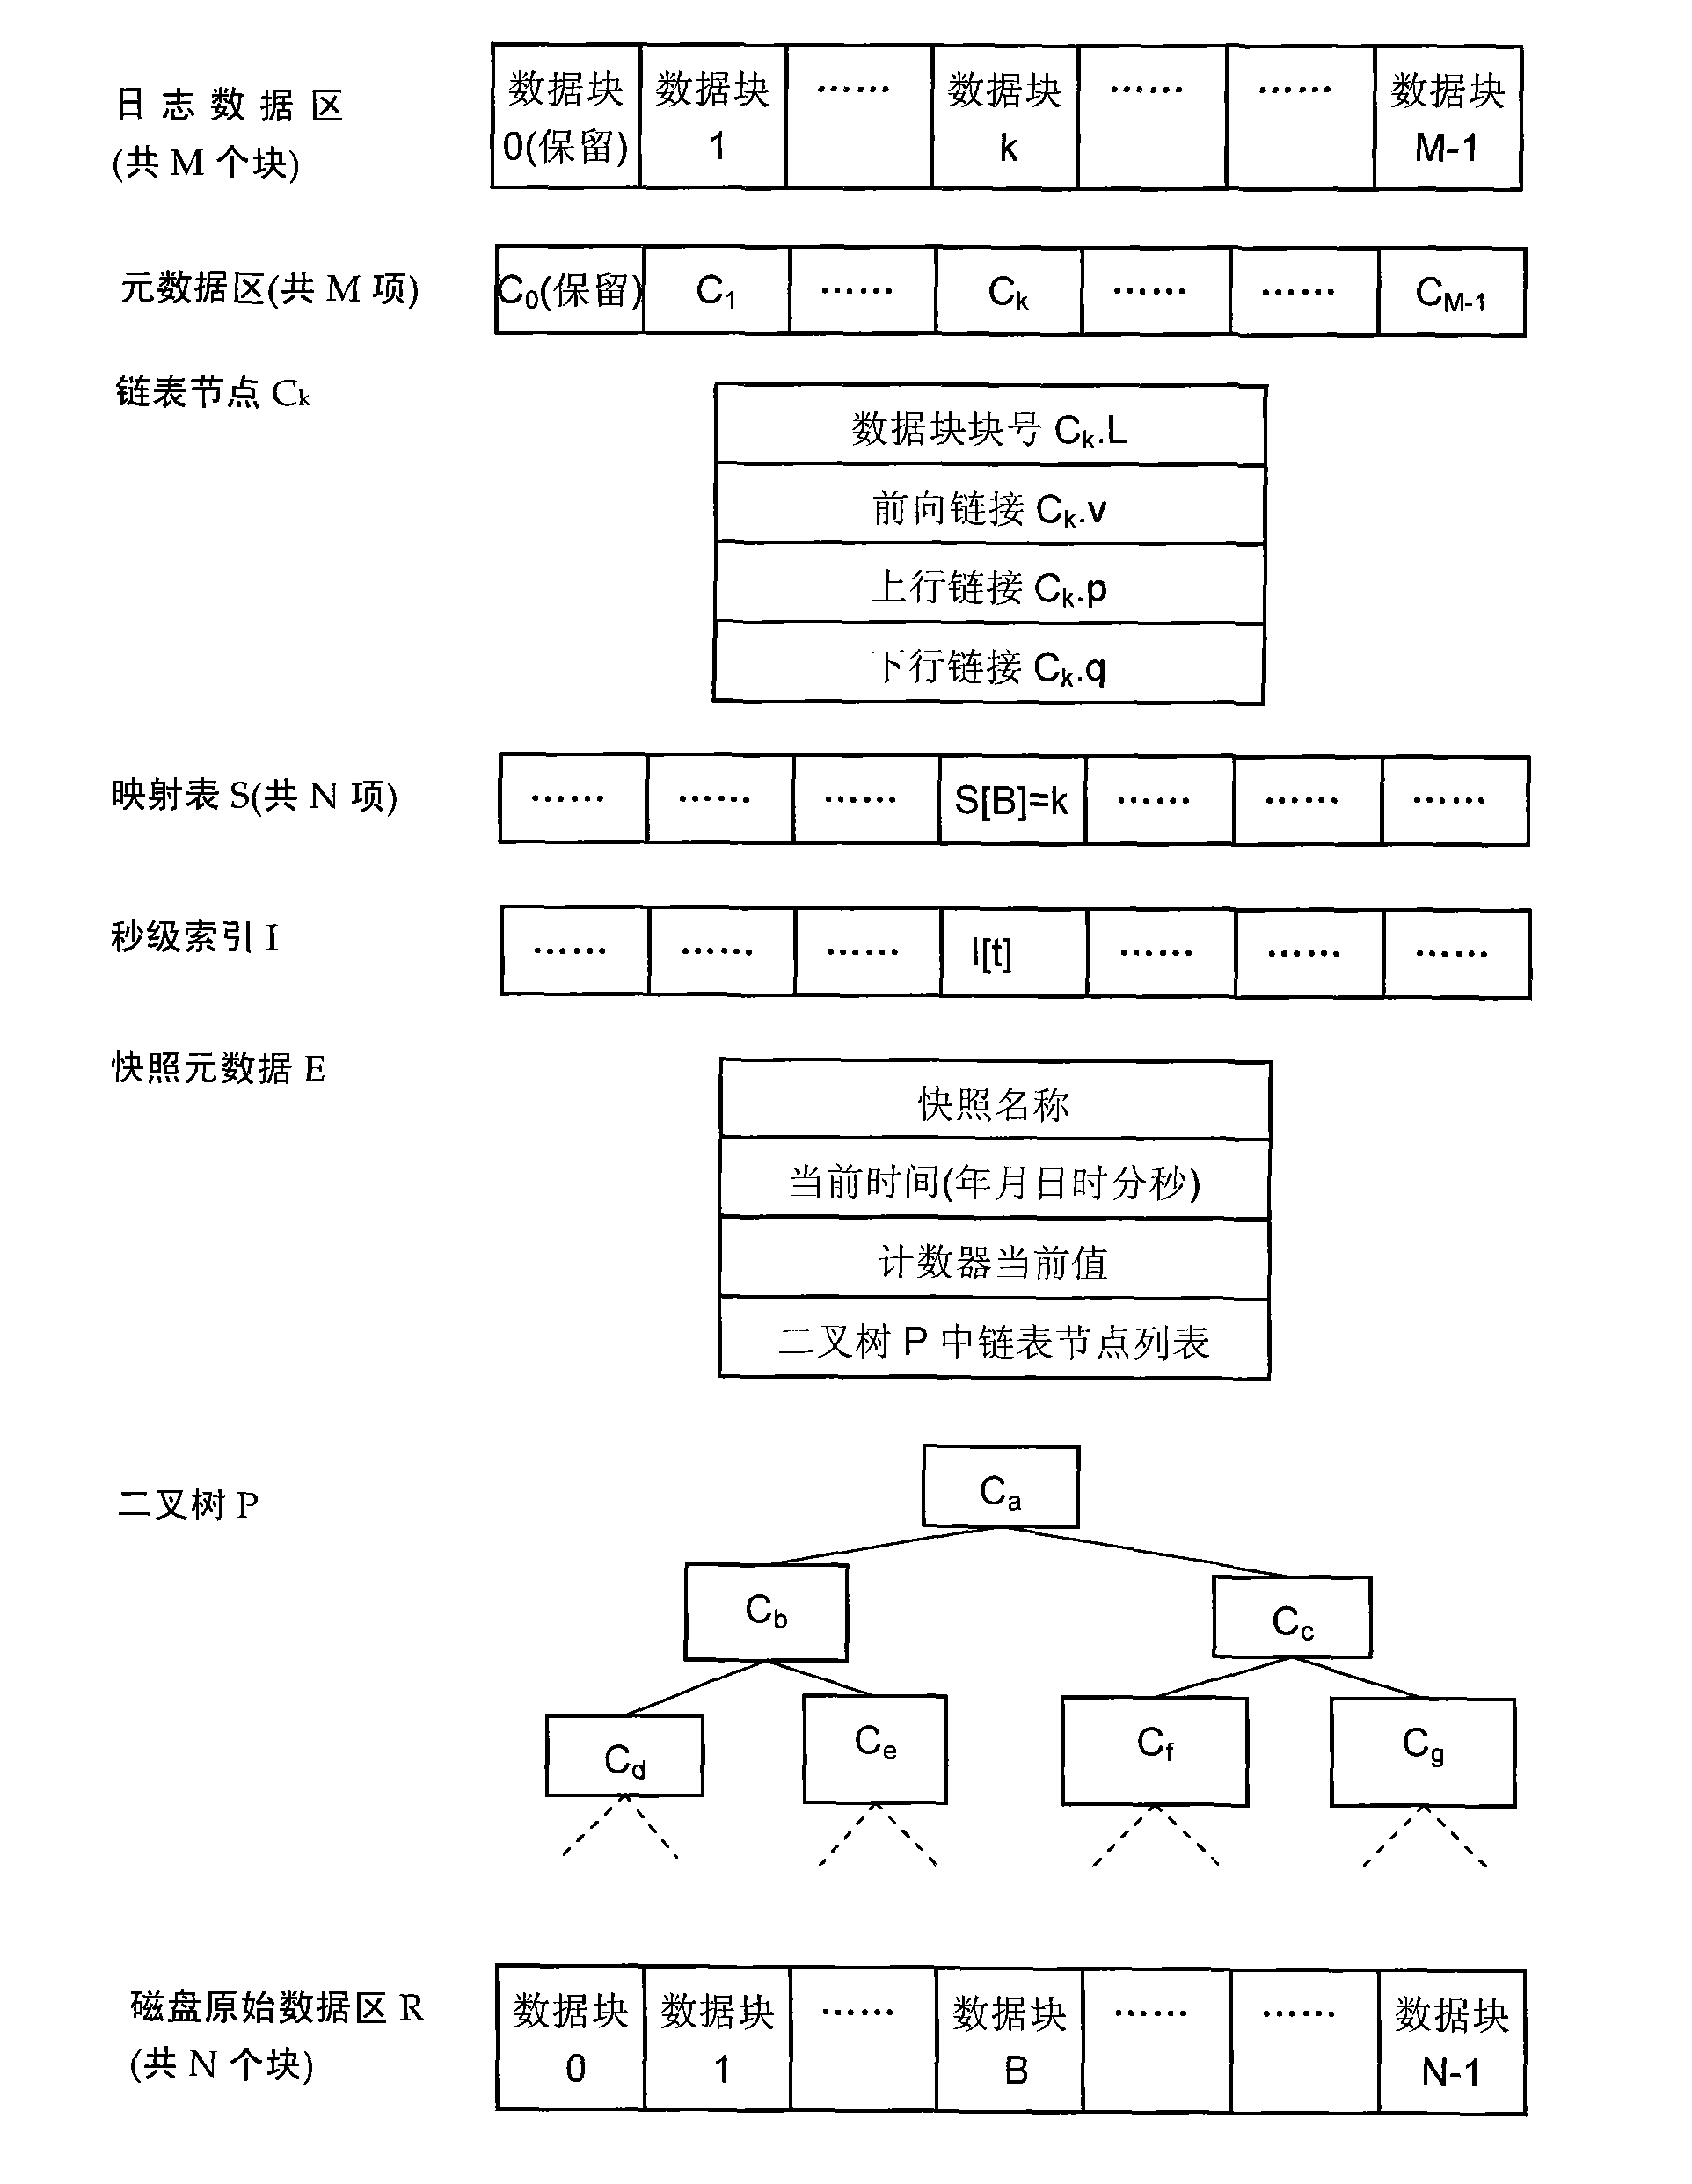 Snapshot storage and data recovery method of continuous data protection system